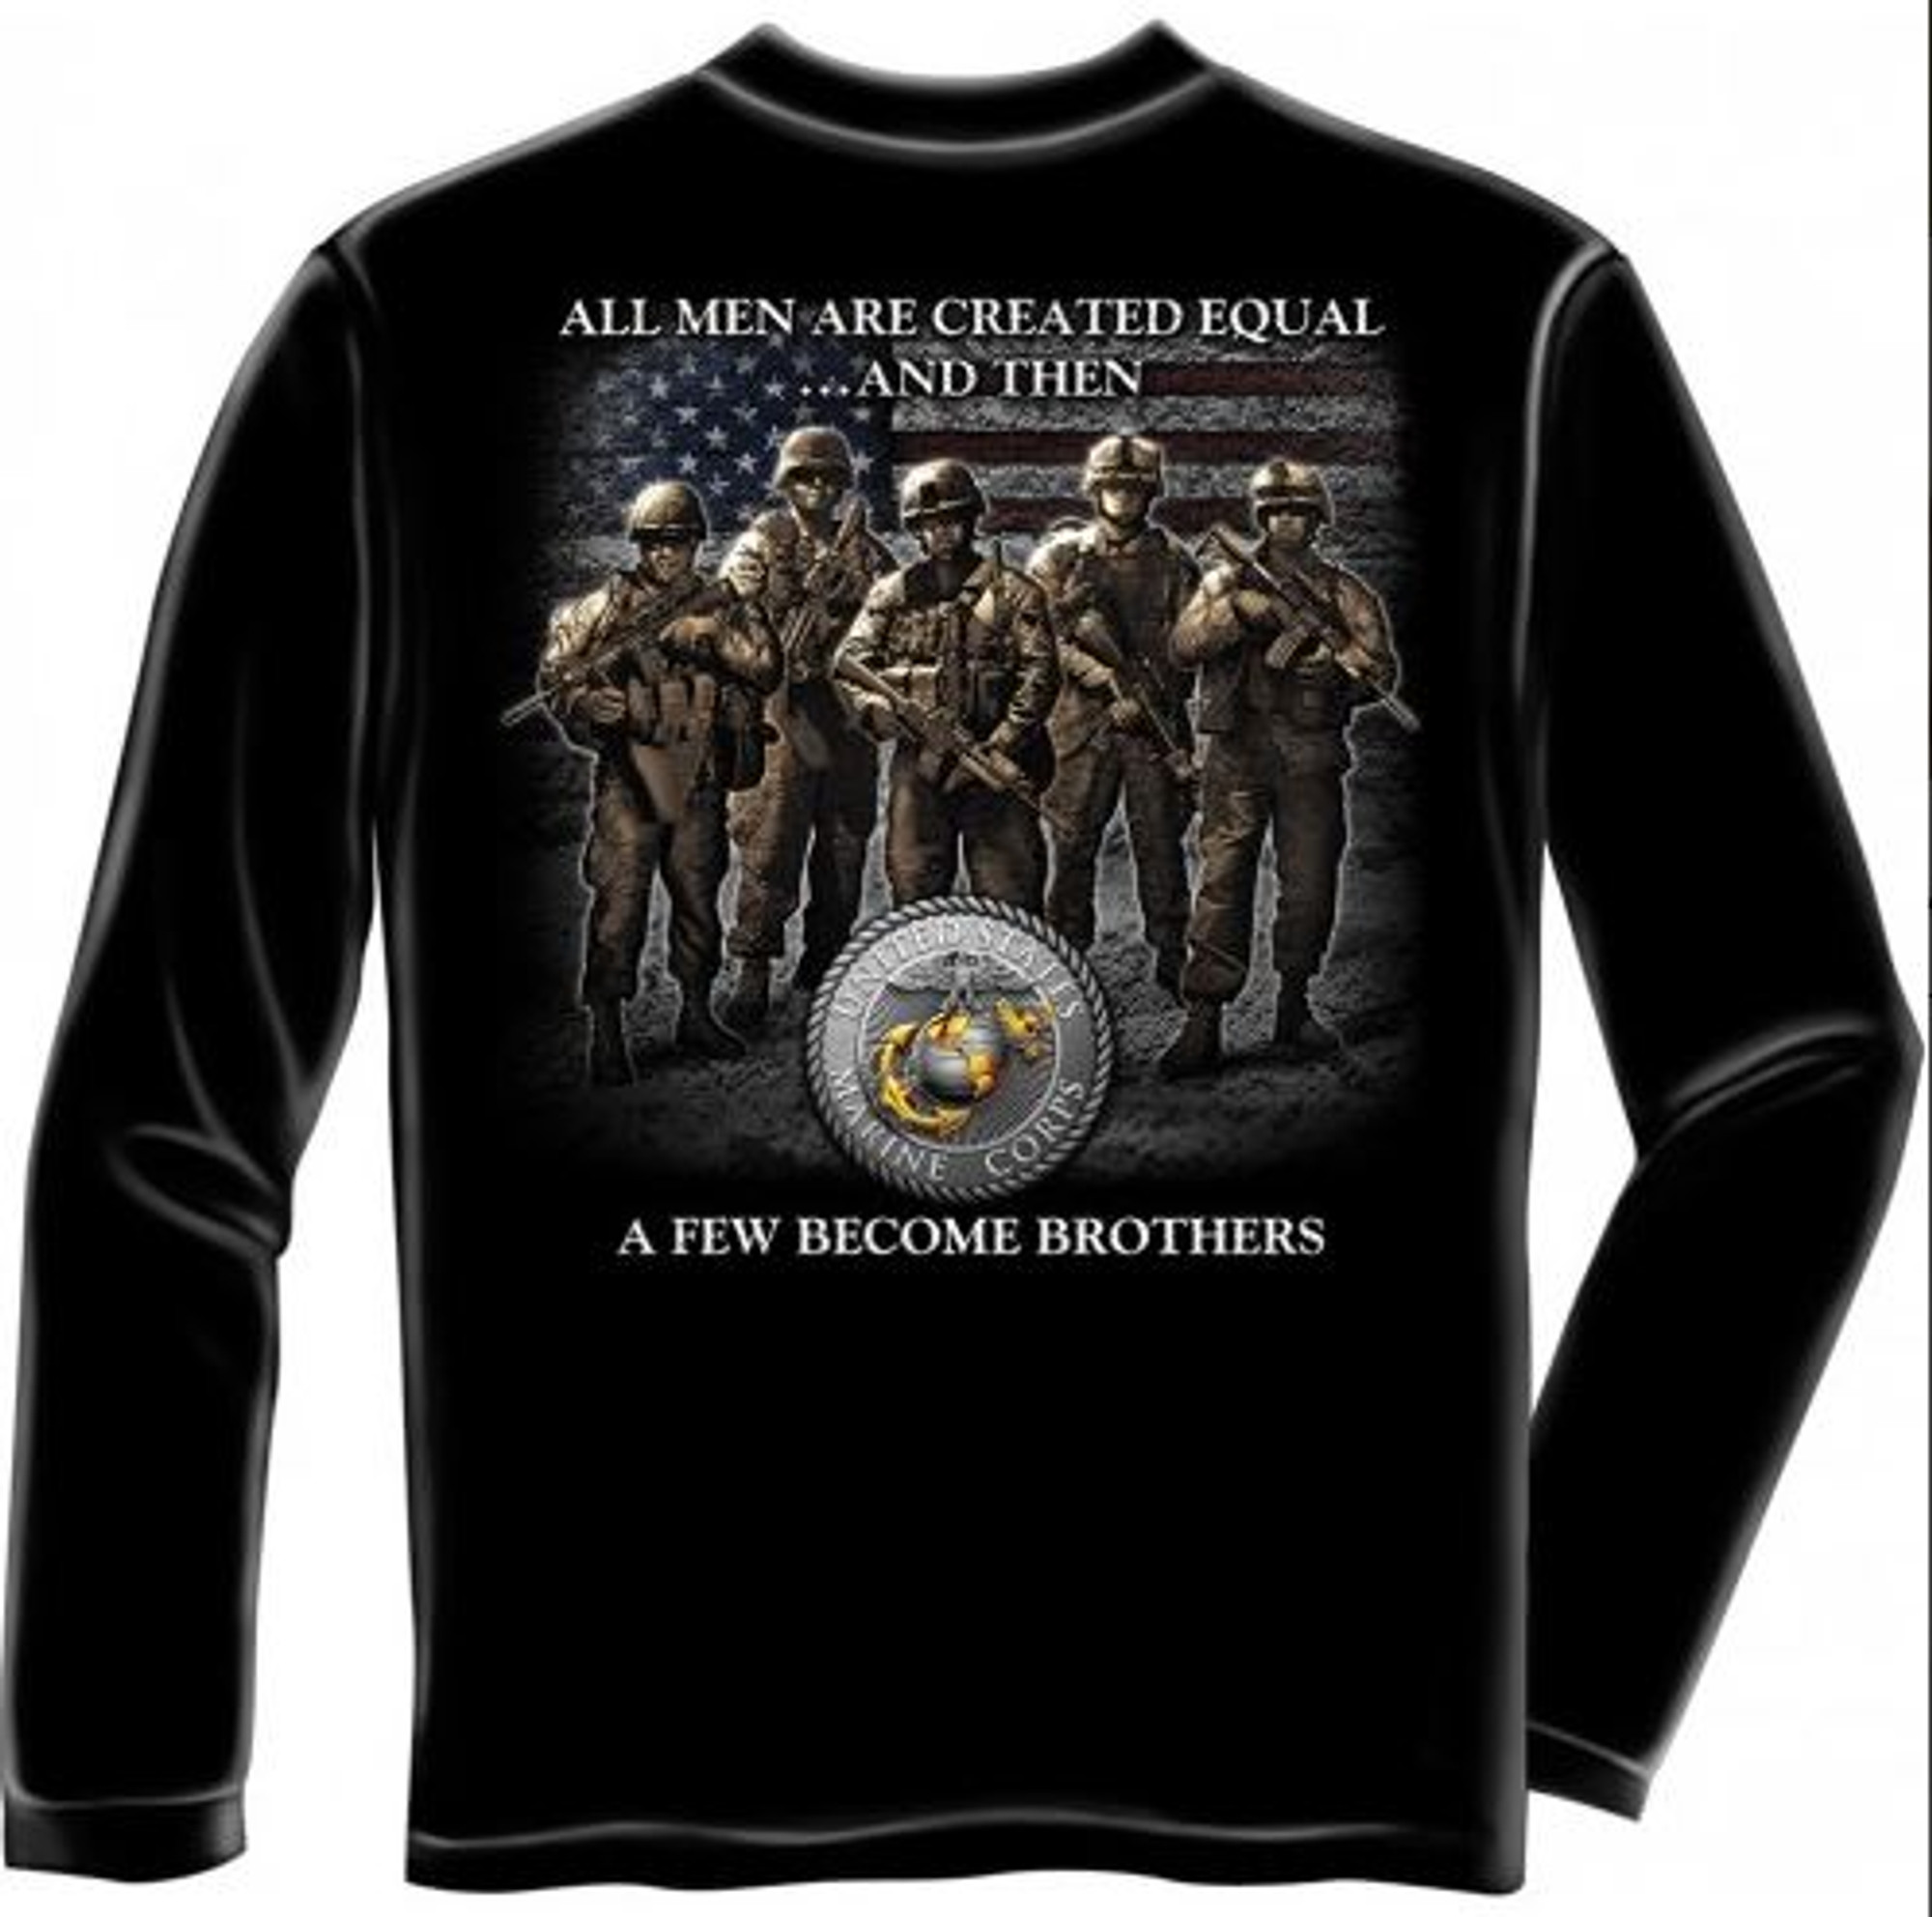 USMC "A Few Become Brothers" Long Sleeve T-Shirt